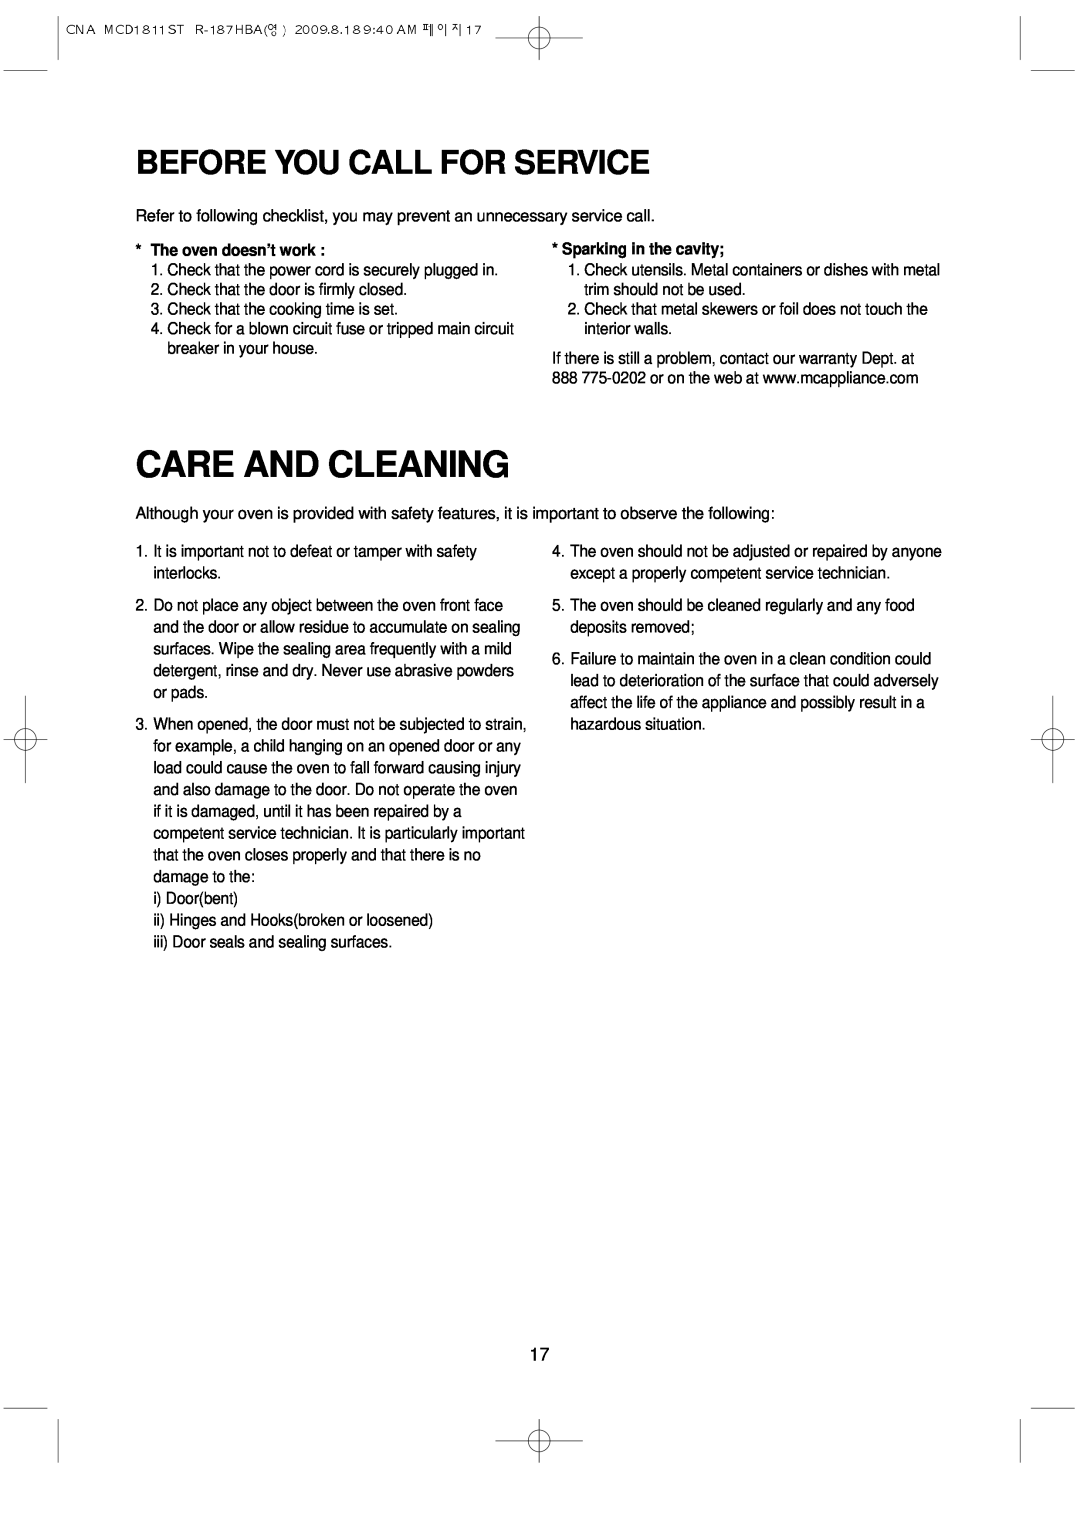 Magic Chef MCD1811ST instruction manual Care And Cleaning, Before You Call For Service 